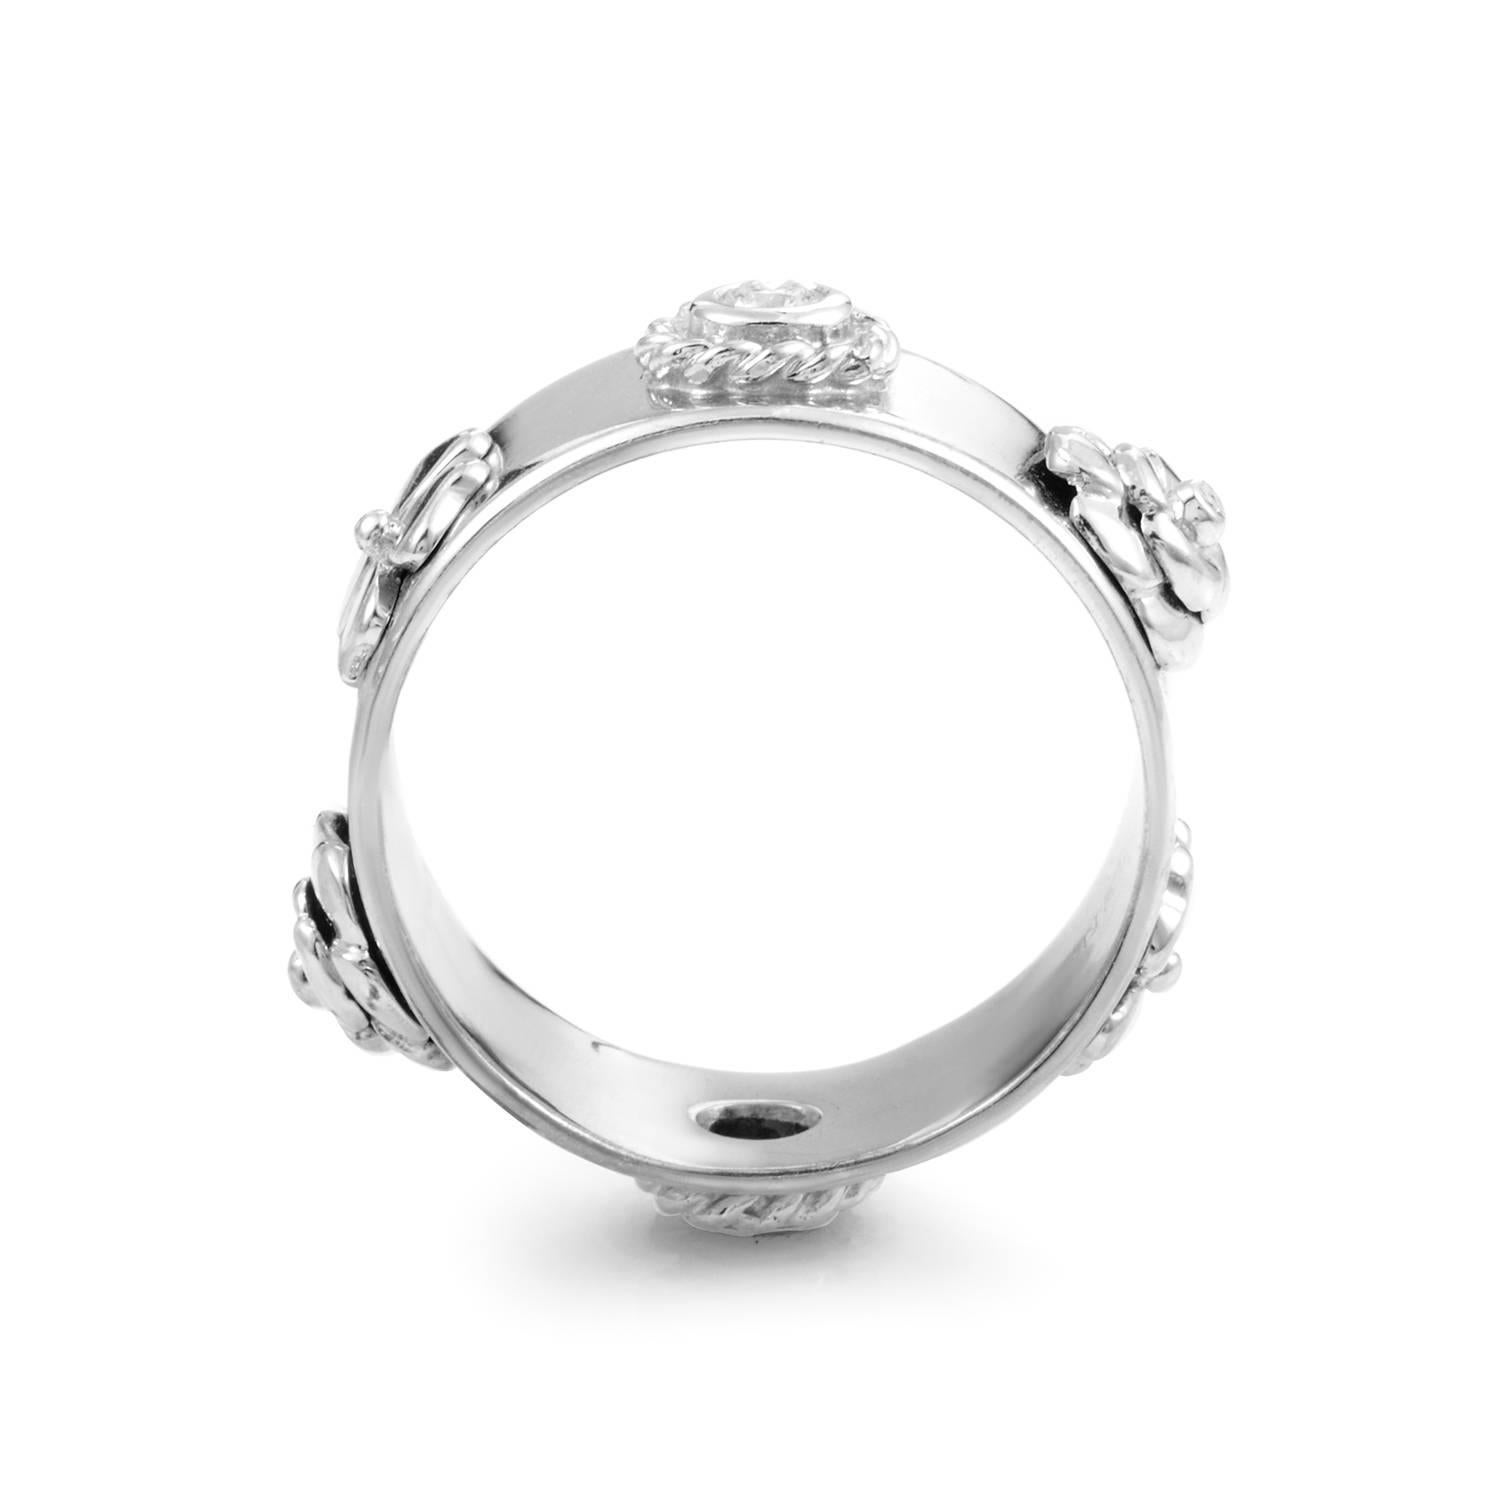 A floral theme is applied with meticulous mastery to this ring design from Chanel. 18K white gold is given perfect spin through the band, and across its surface in precise measures flora motifs rise to prominence with fluidity. Two of which boast a